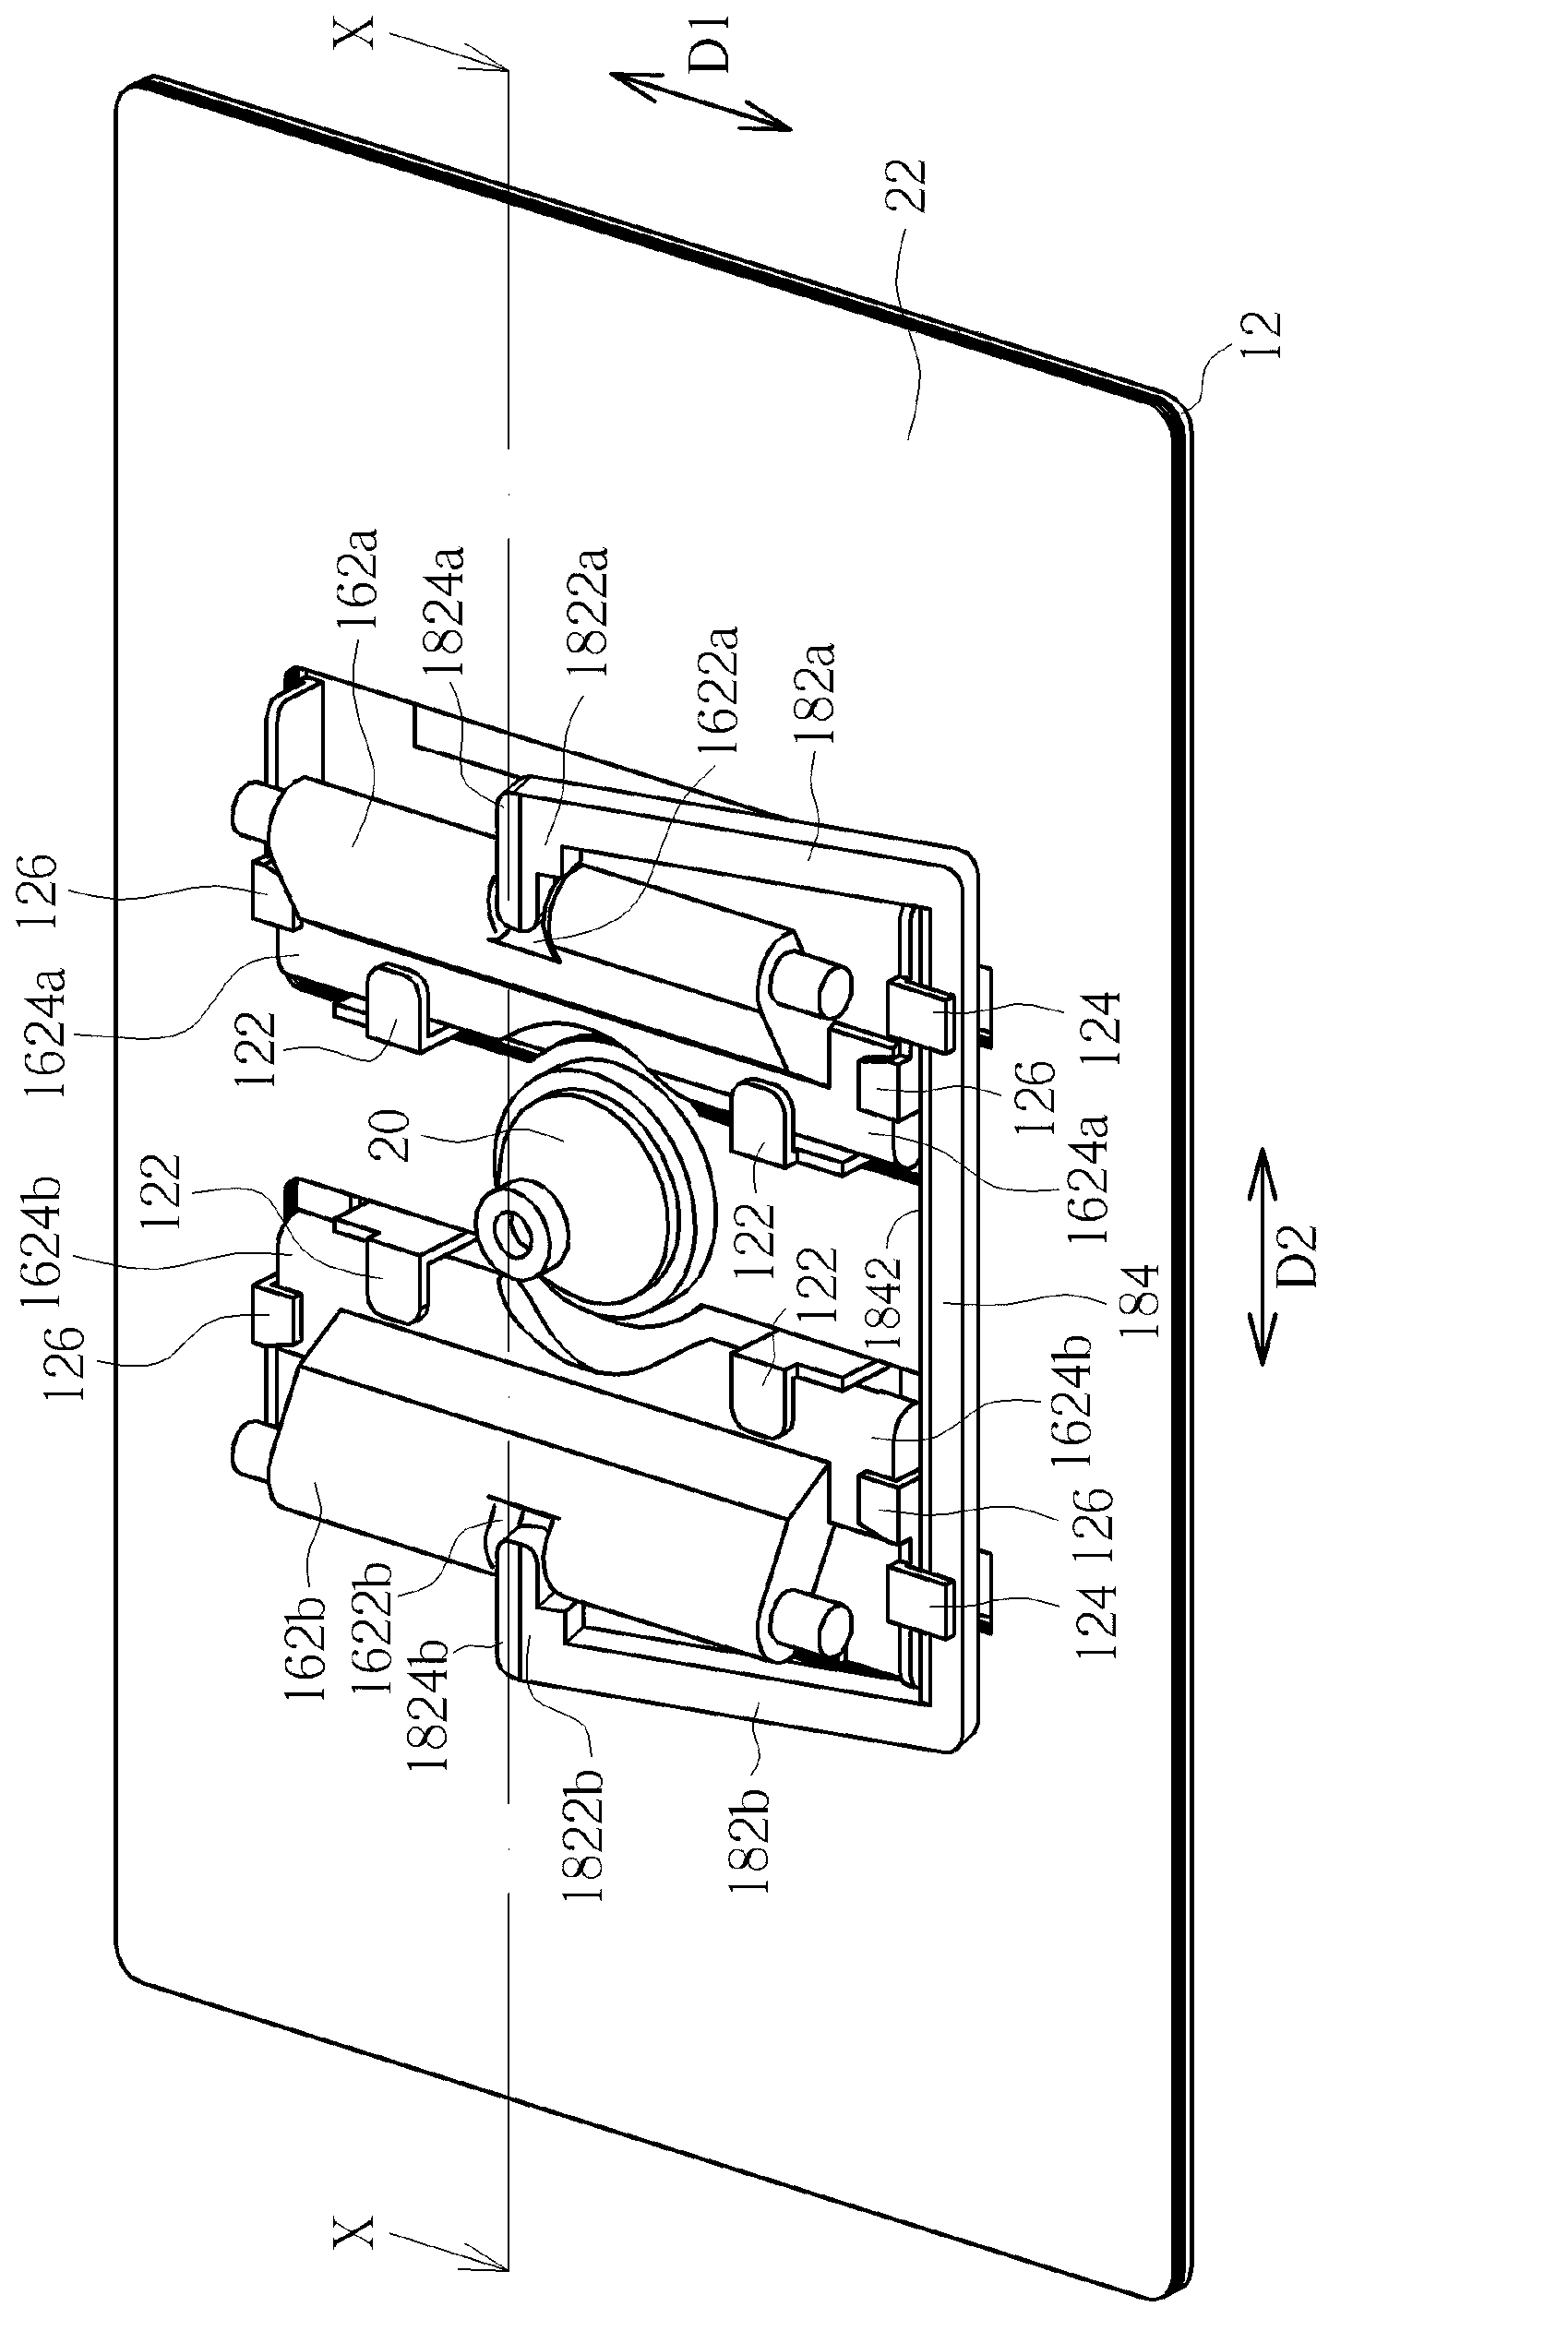 Press key structure and balance rod thereof